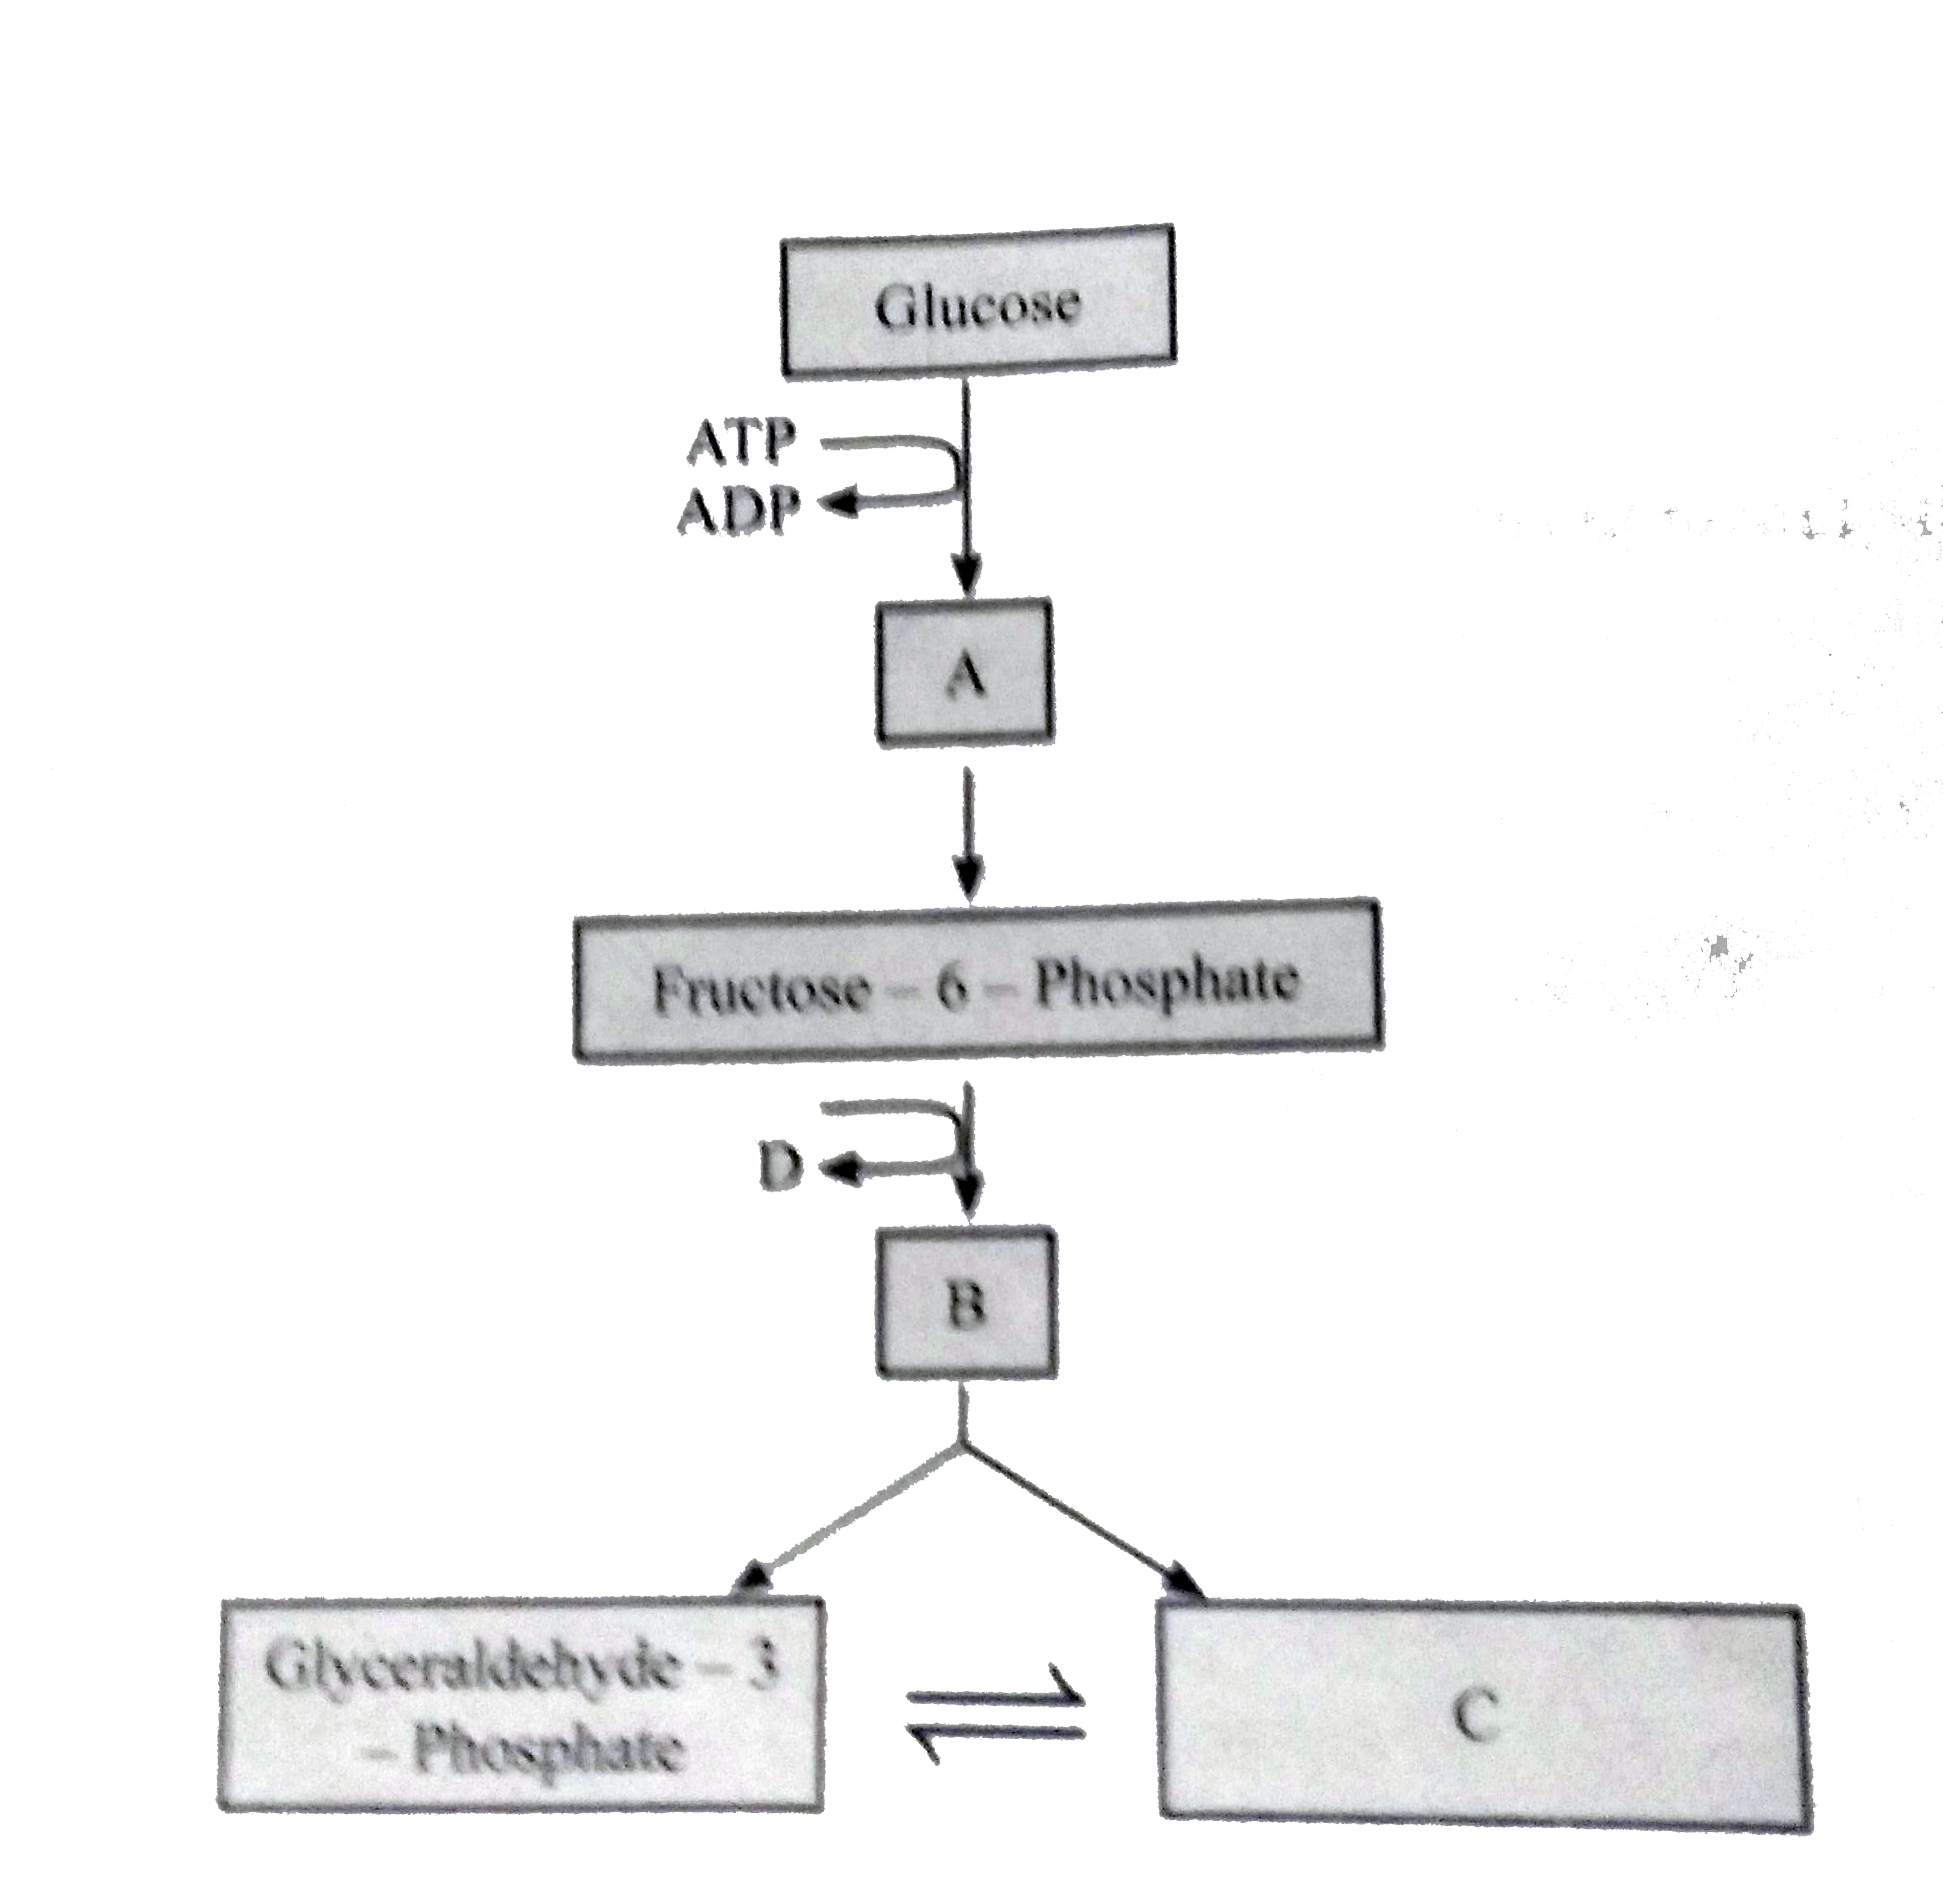 The Flow Chart given below depicts the preparatory phase of glycolysis pathway. Complete it by filling the missing steps A, B, C and also indicate whether ATP is being used up or released at Step D.